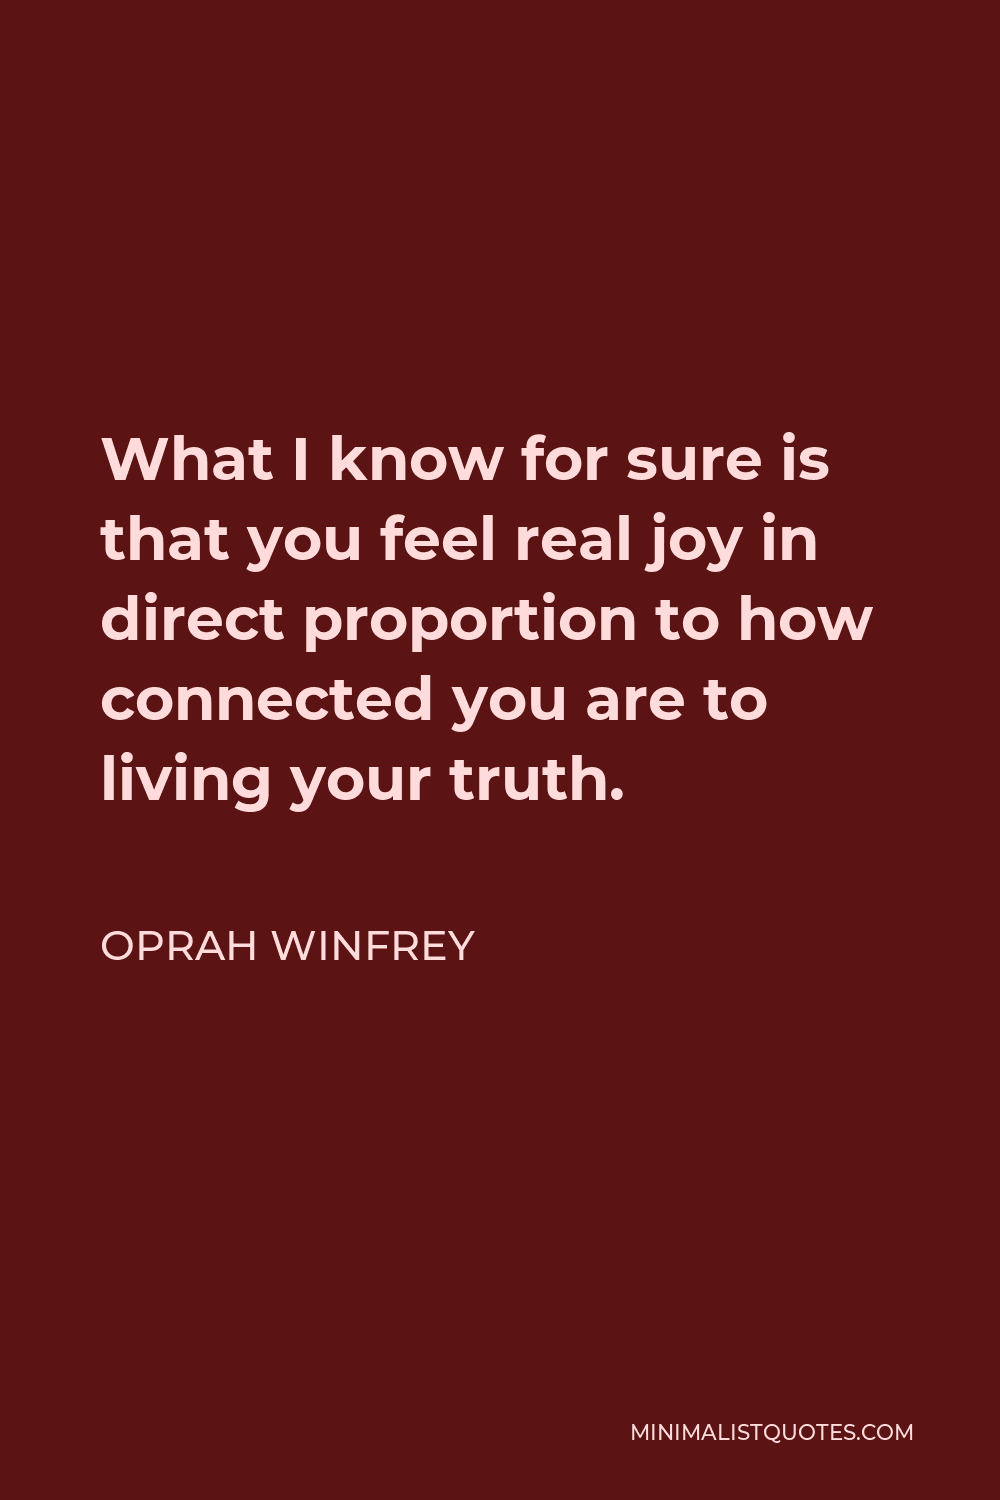 Oprah Winfrey Quote - What I know for sure is that you feel real joy in direct proportion to how connected you are to living your truth.